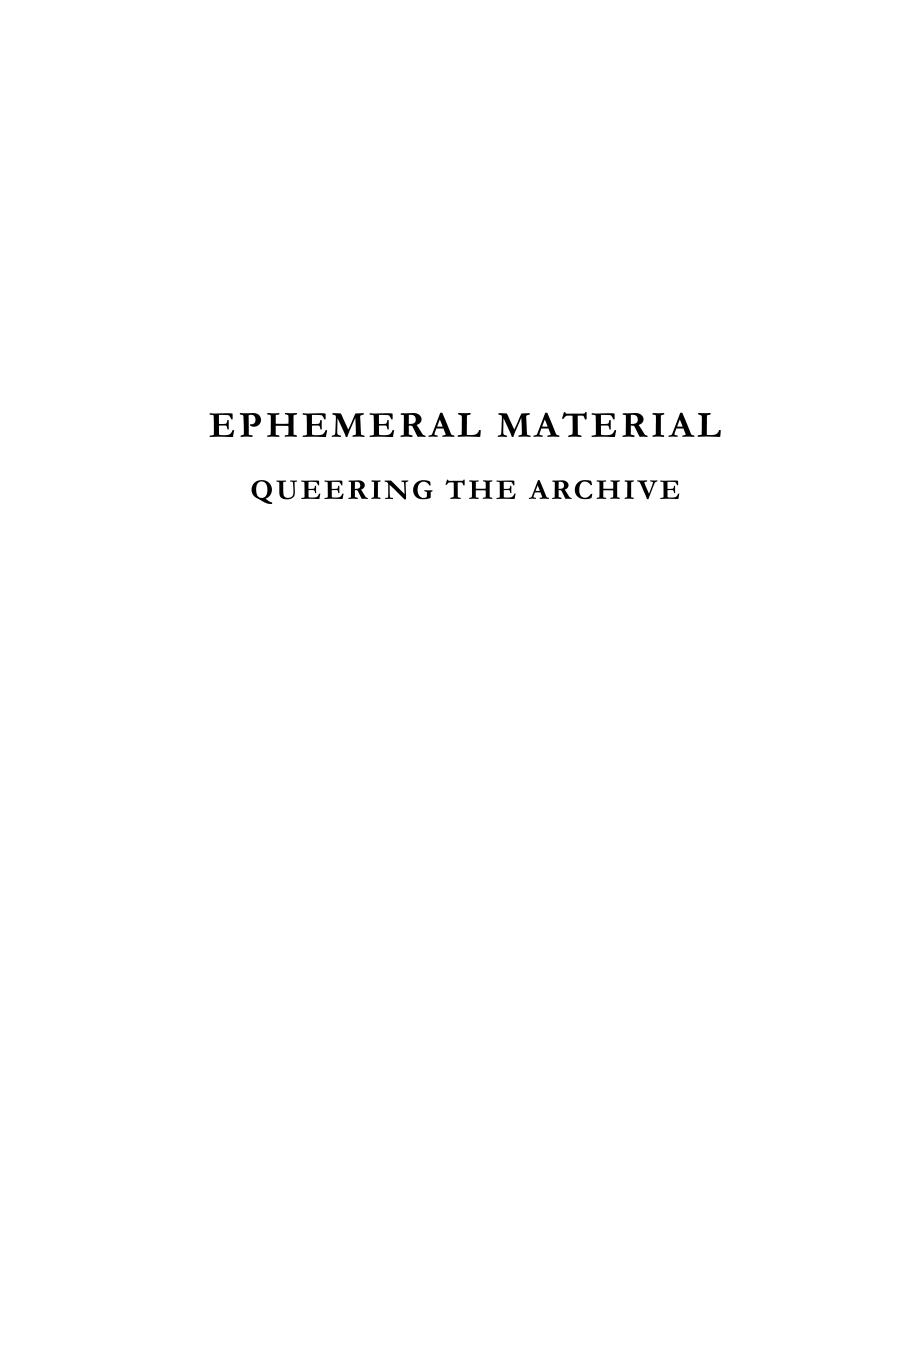 Ephemeral Material : Queering the Archive by Alana Kumbier